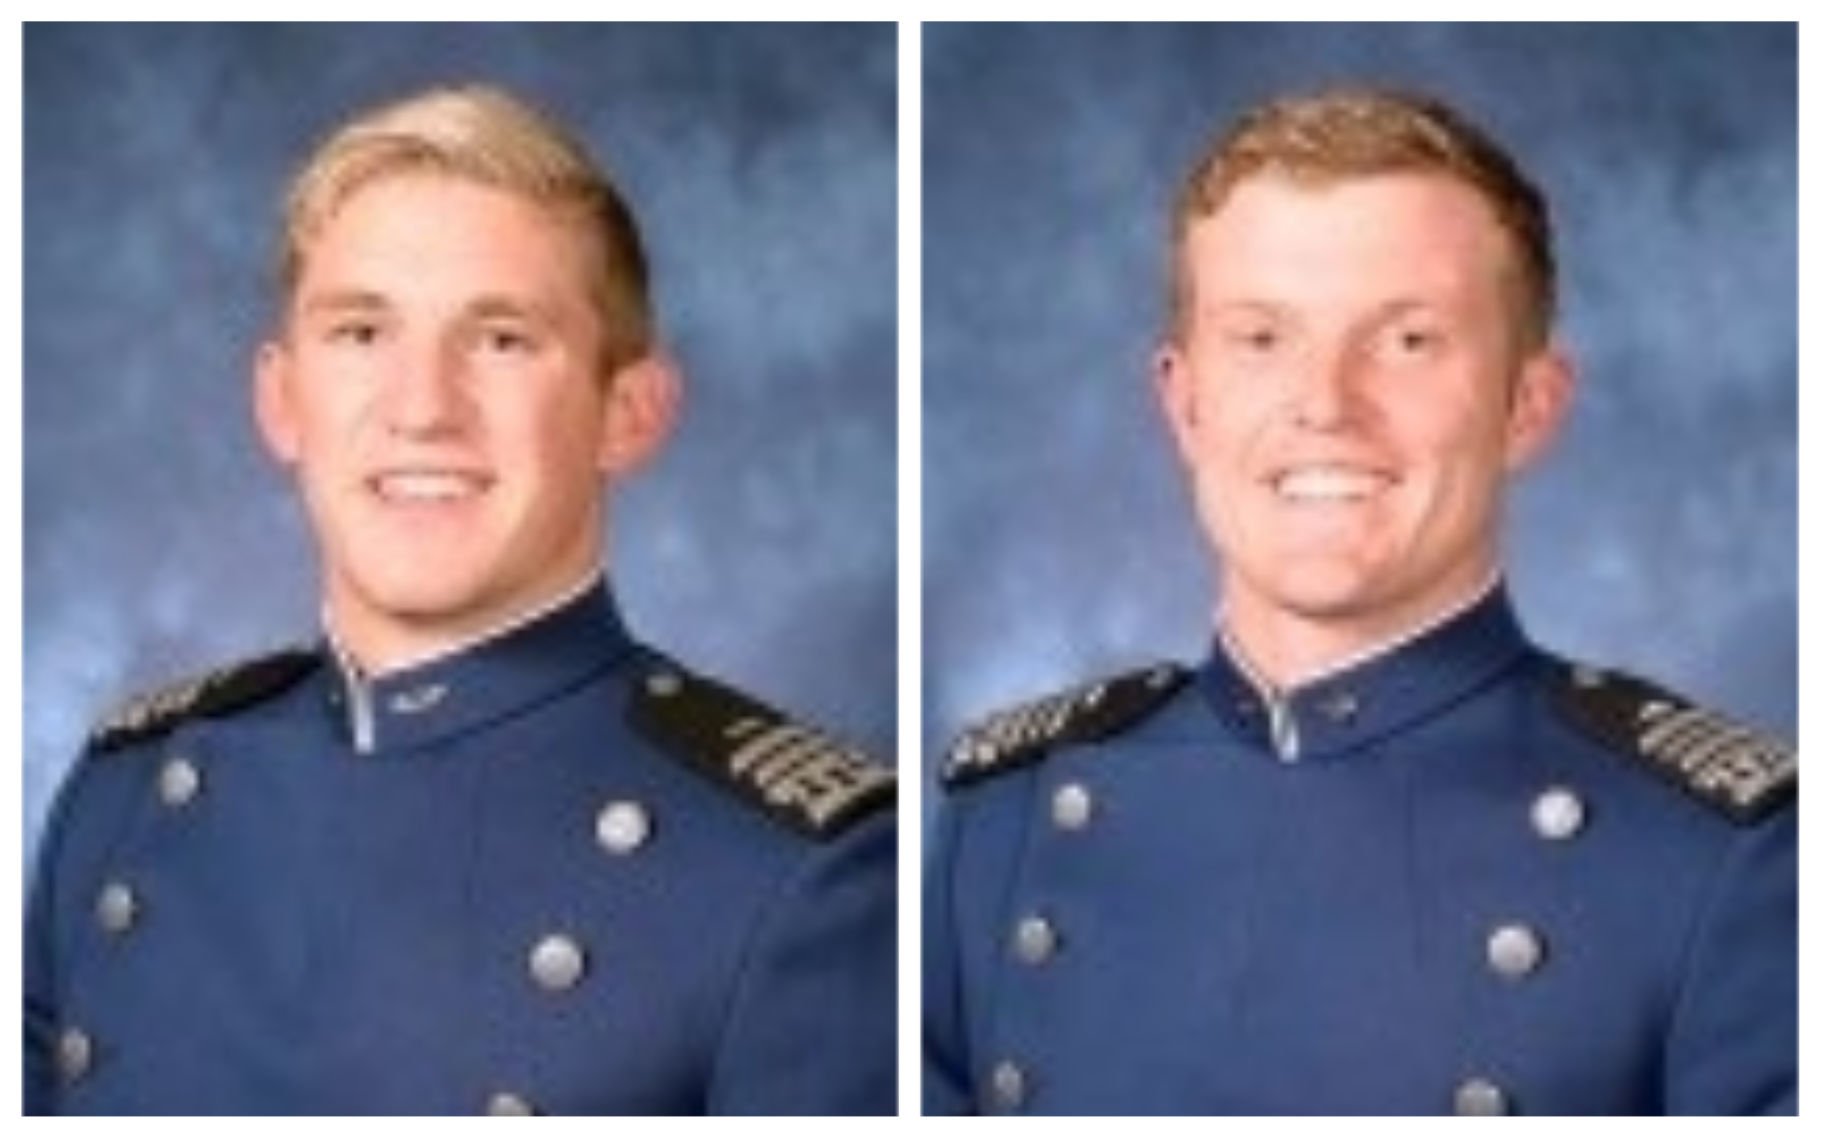 Air Force Academy ritual was something out of a bad fraternity movie, sources say Military gazette